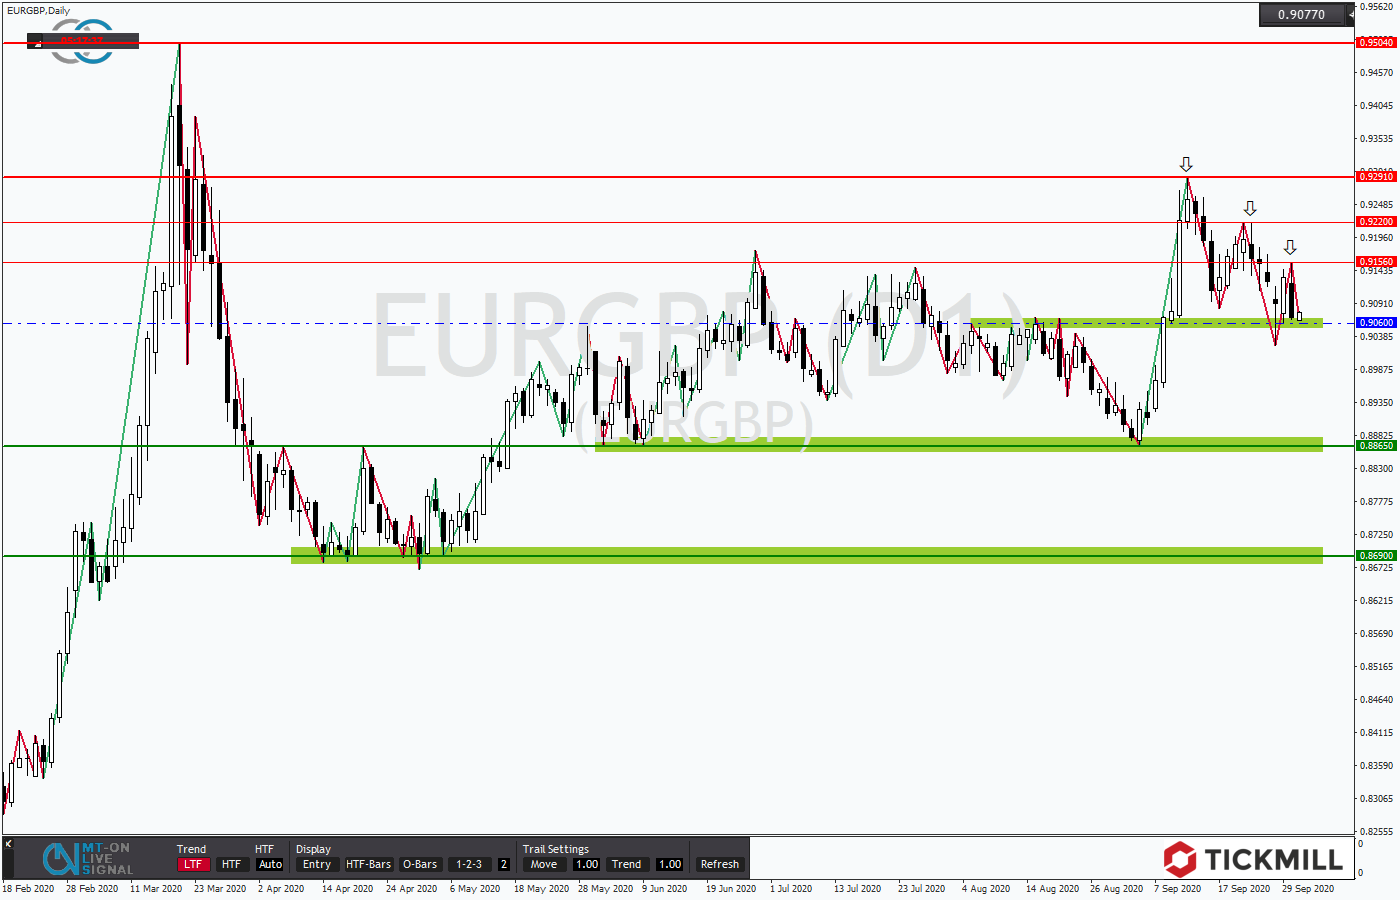 Tickmill-Analyse: EURGBP am Support 